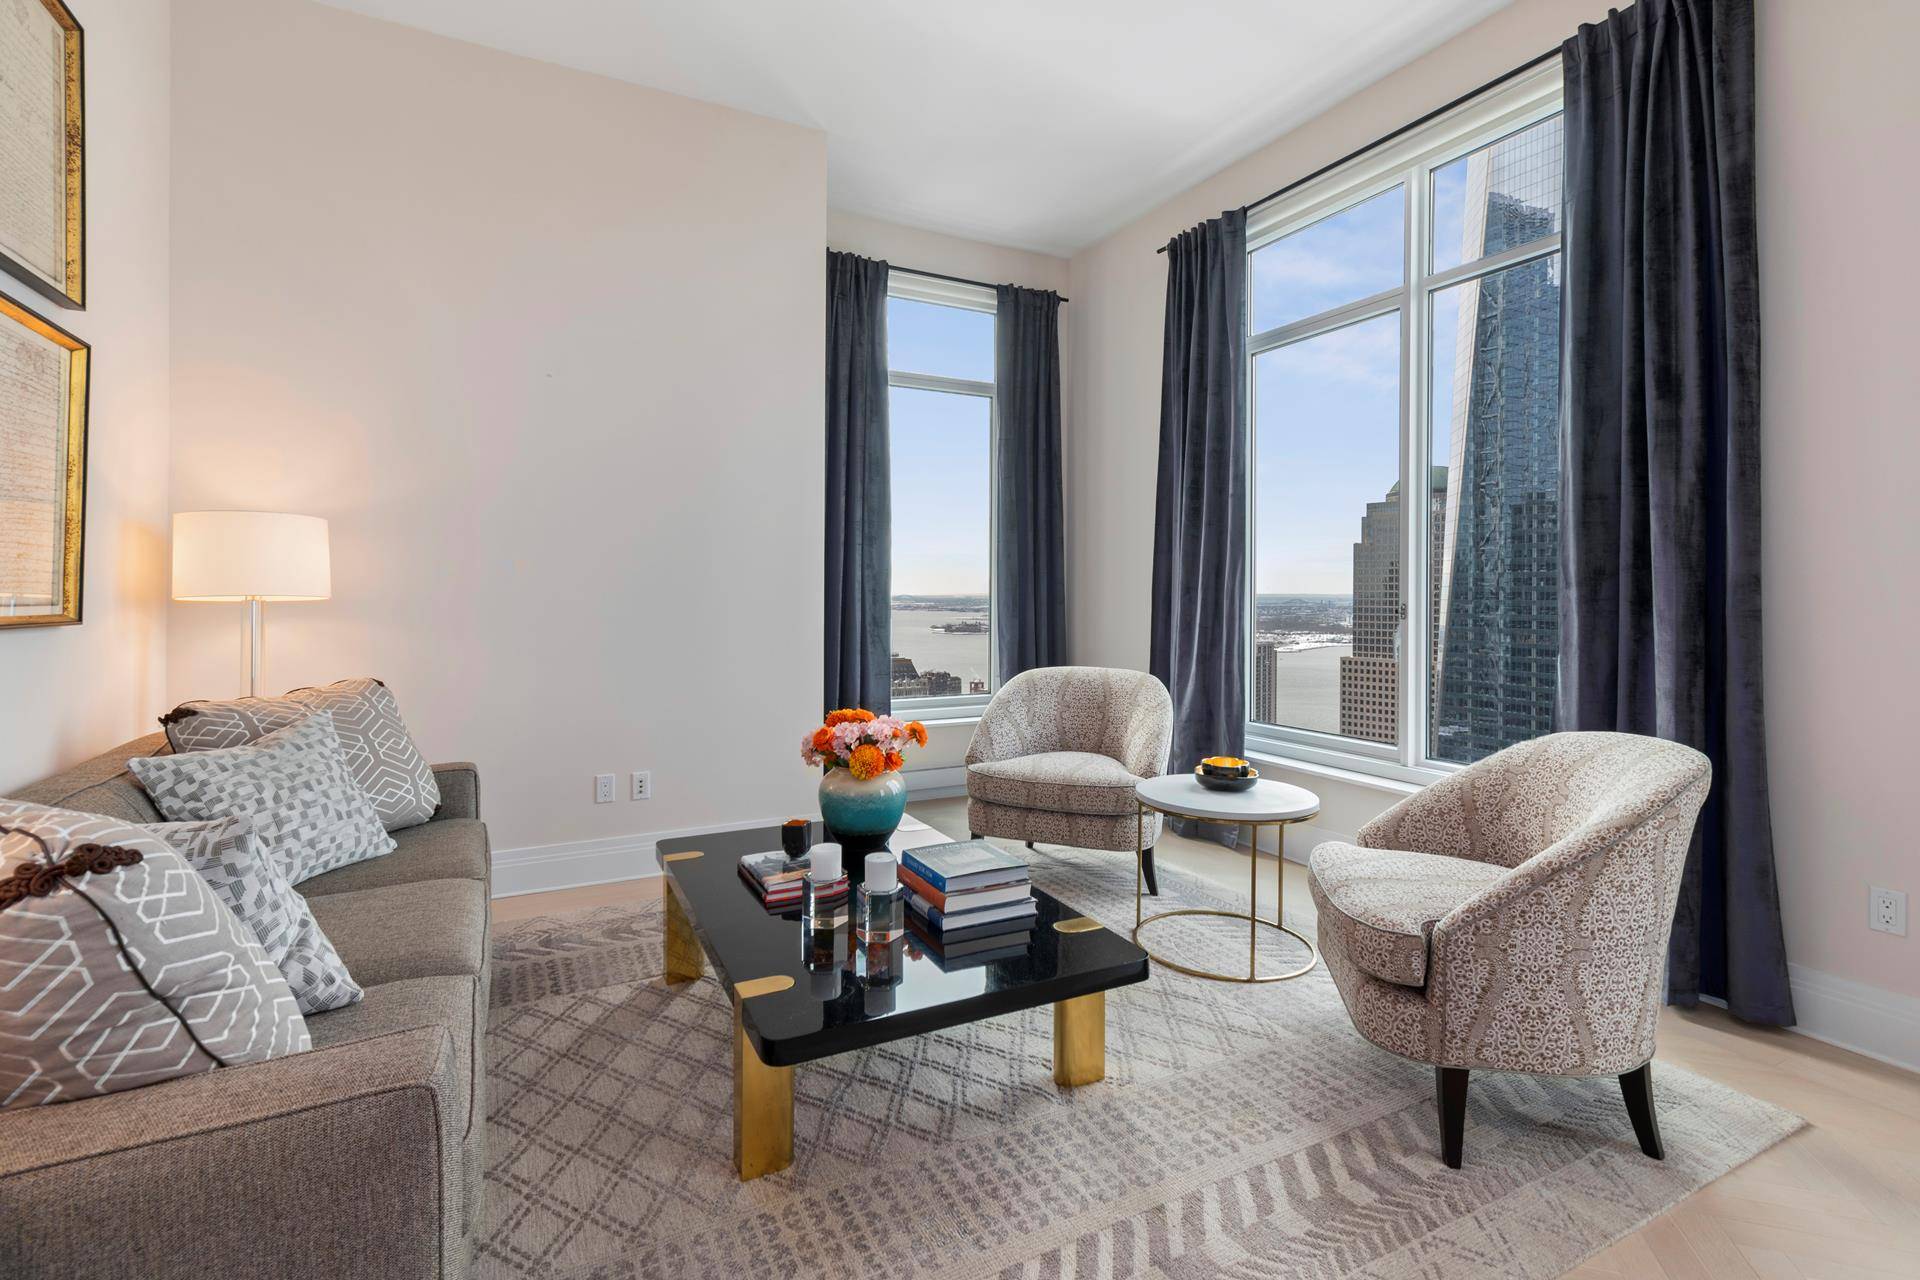 Welcome to one of the most desirable apartments at 30 Park Place.